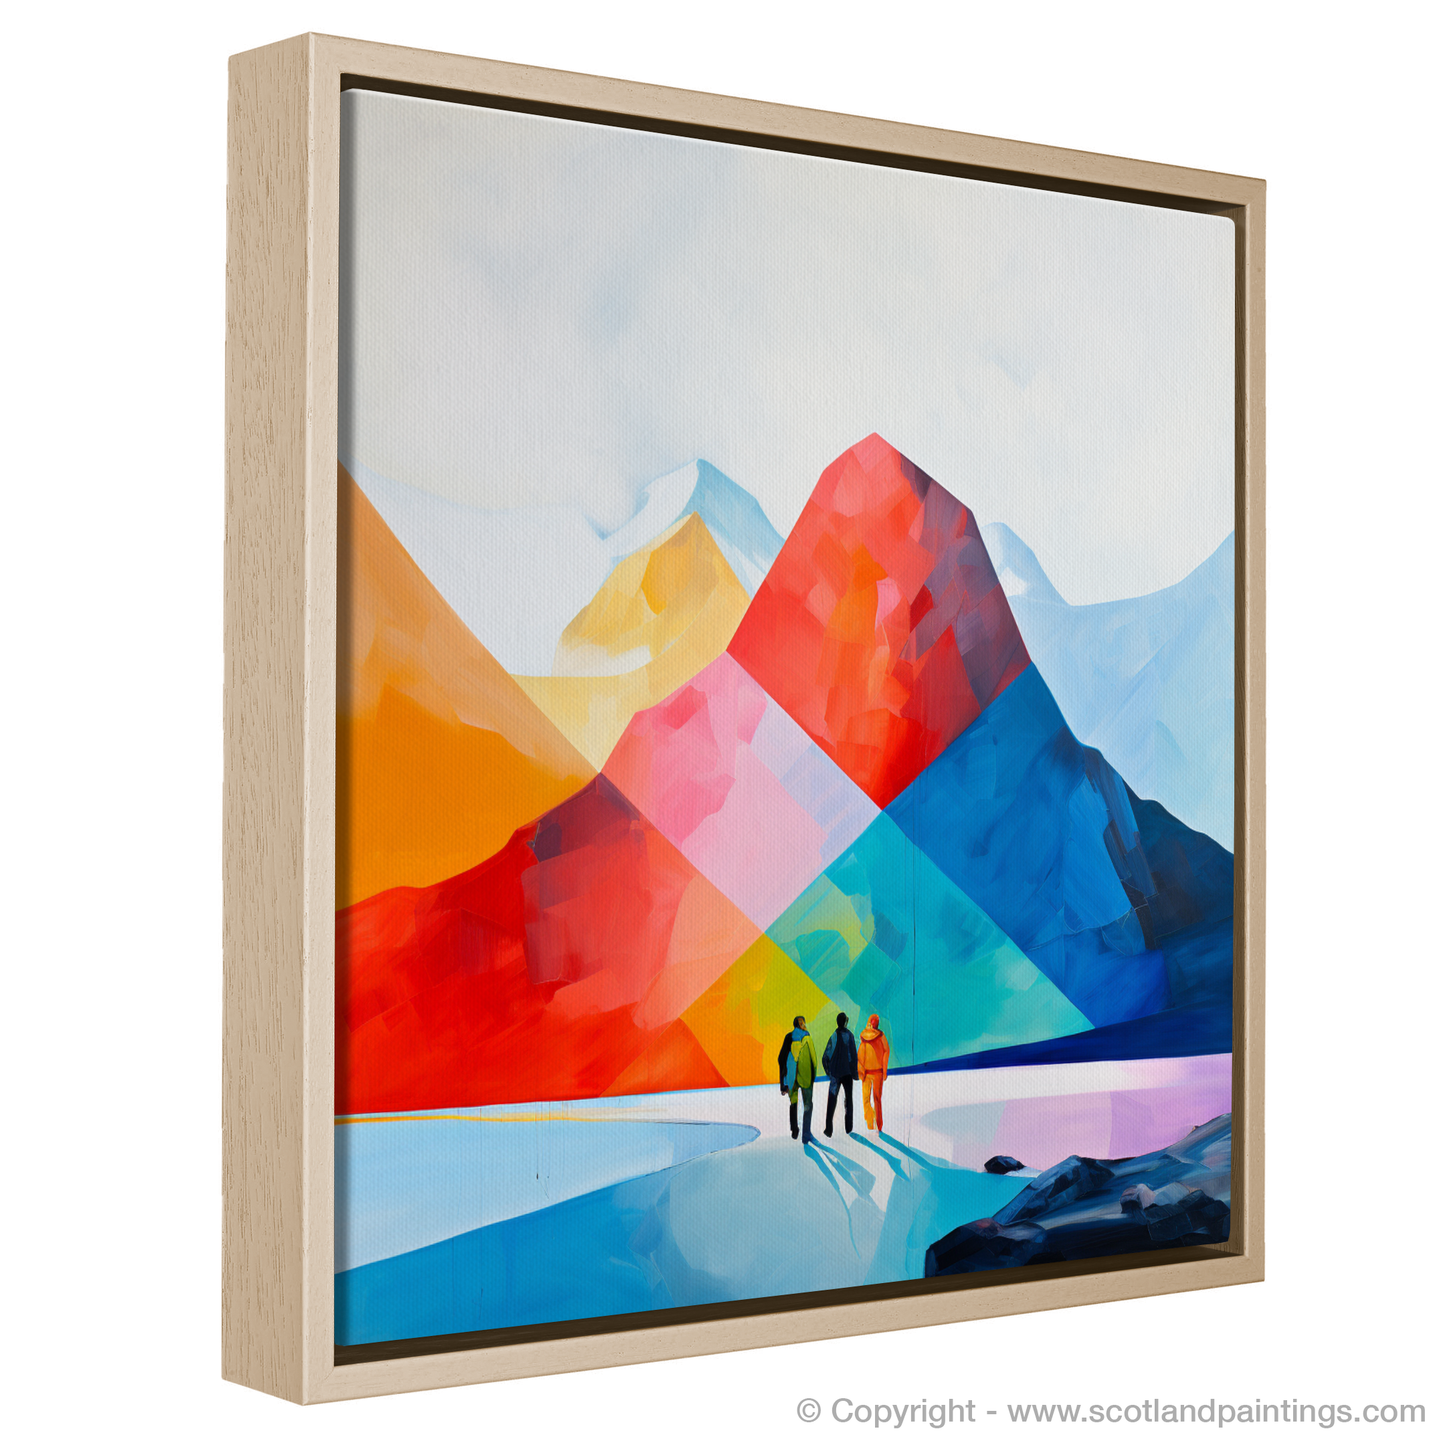 Painting and Art Print of Hikers in Glencoe entitled "Hikers in Glencoe: A Minimalist Tribute to the Scottish Highlands".